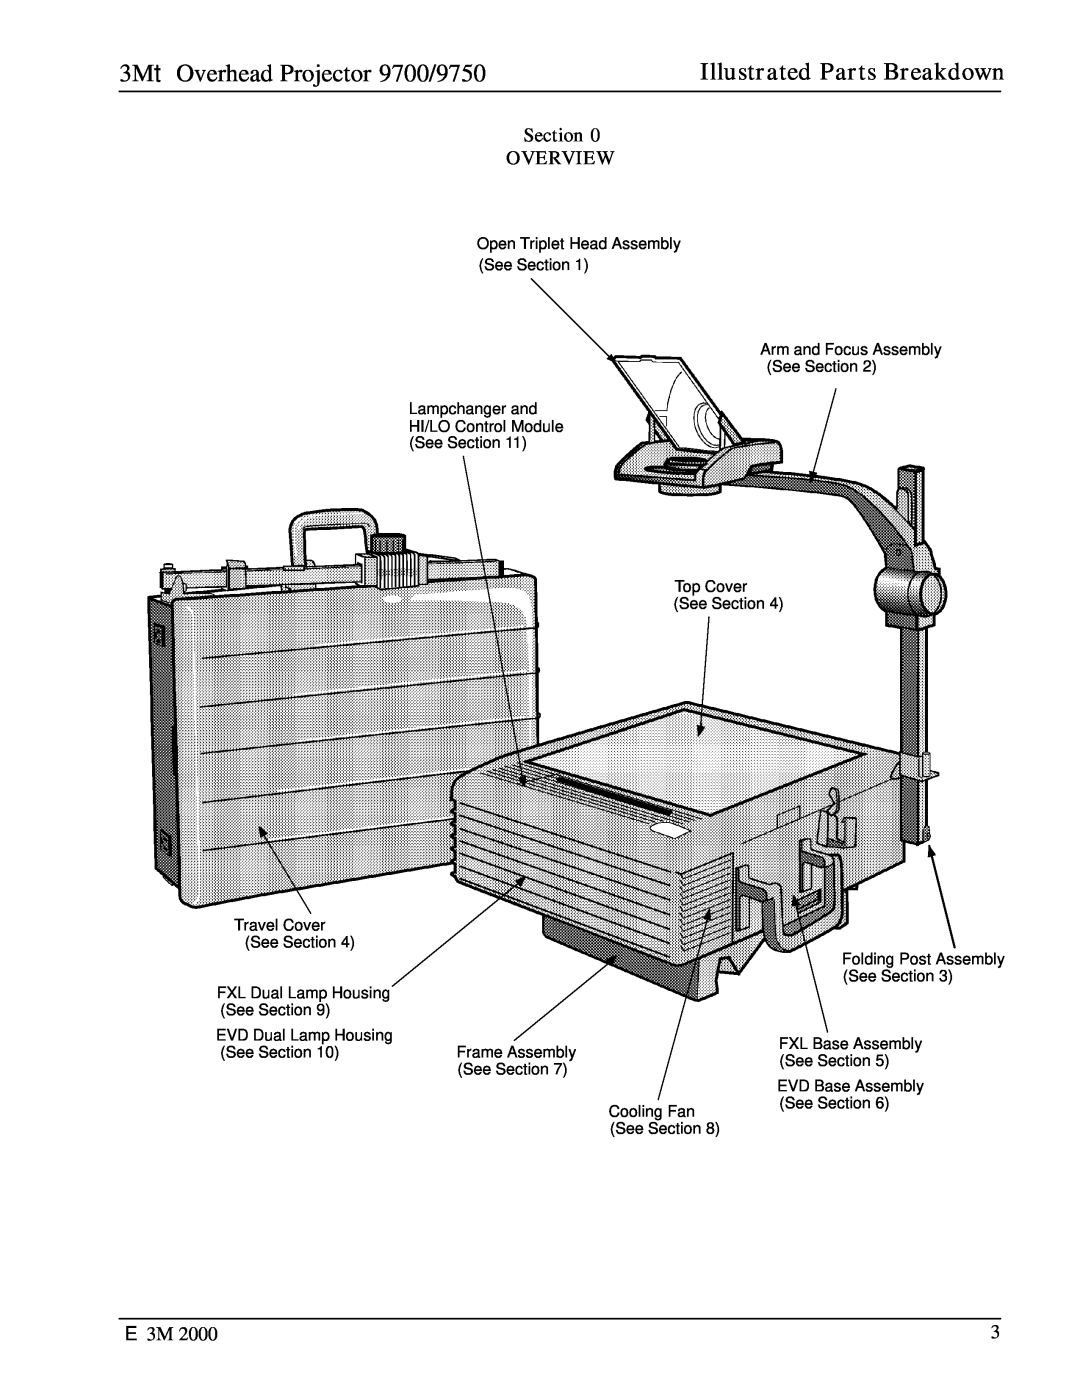 3M manual 3M tOverhead Projector 9700/9750, Section OVERVIEW, Illustrated Parts Breakdown 